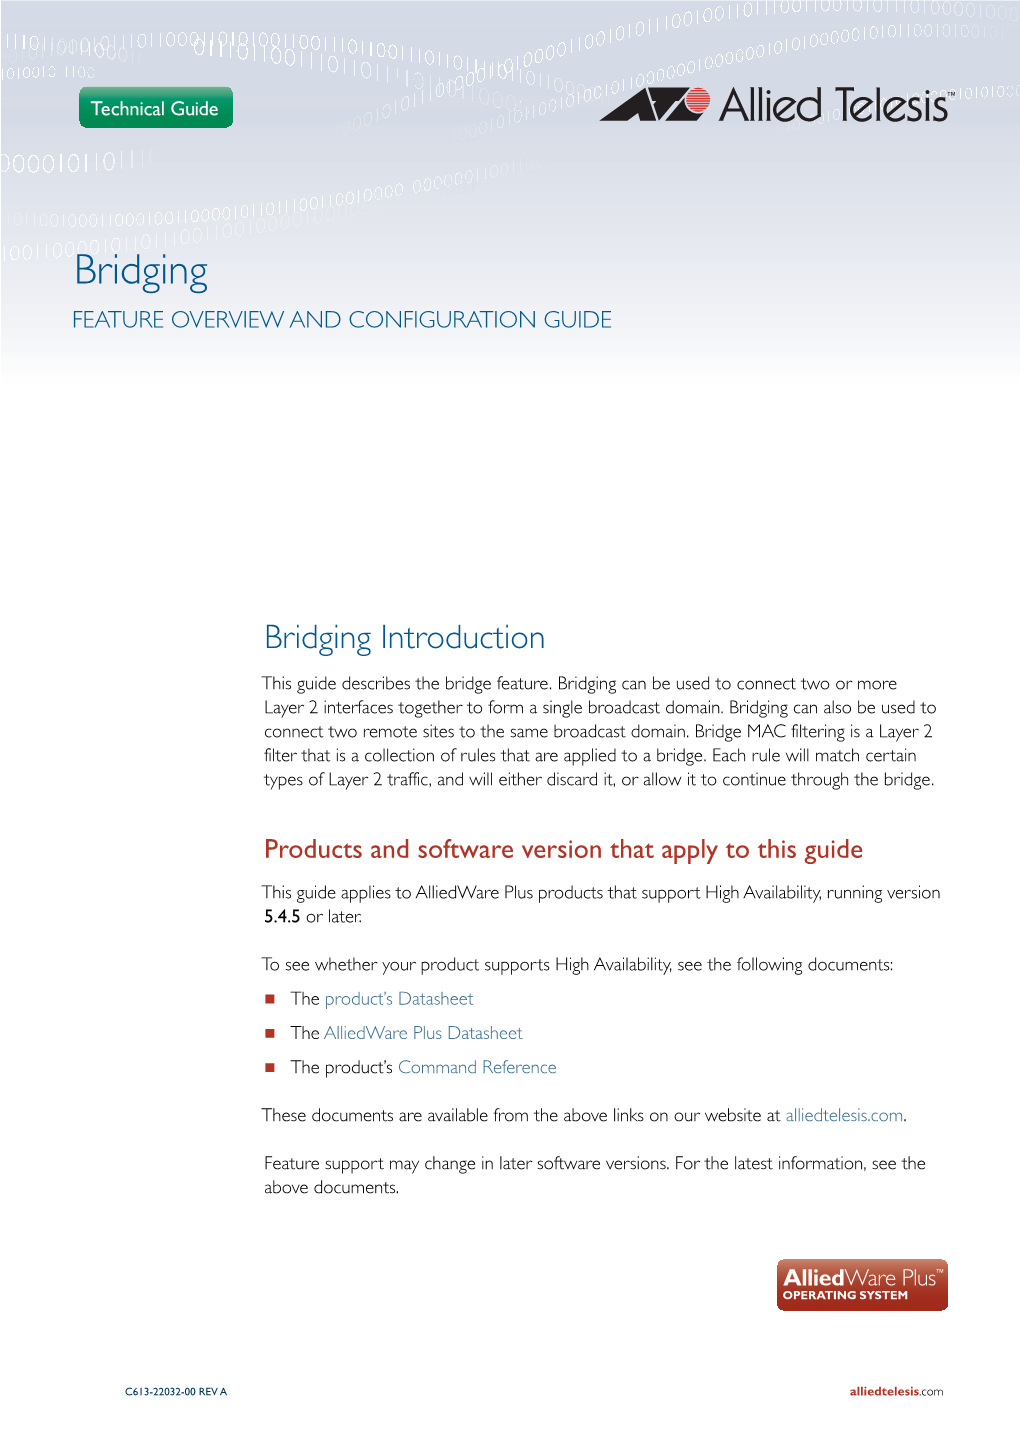 Bridging FEATURE OVERVIEW and CONFIGURATION GUIDE